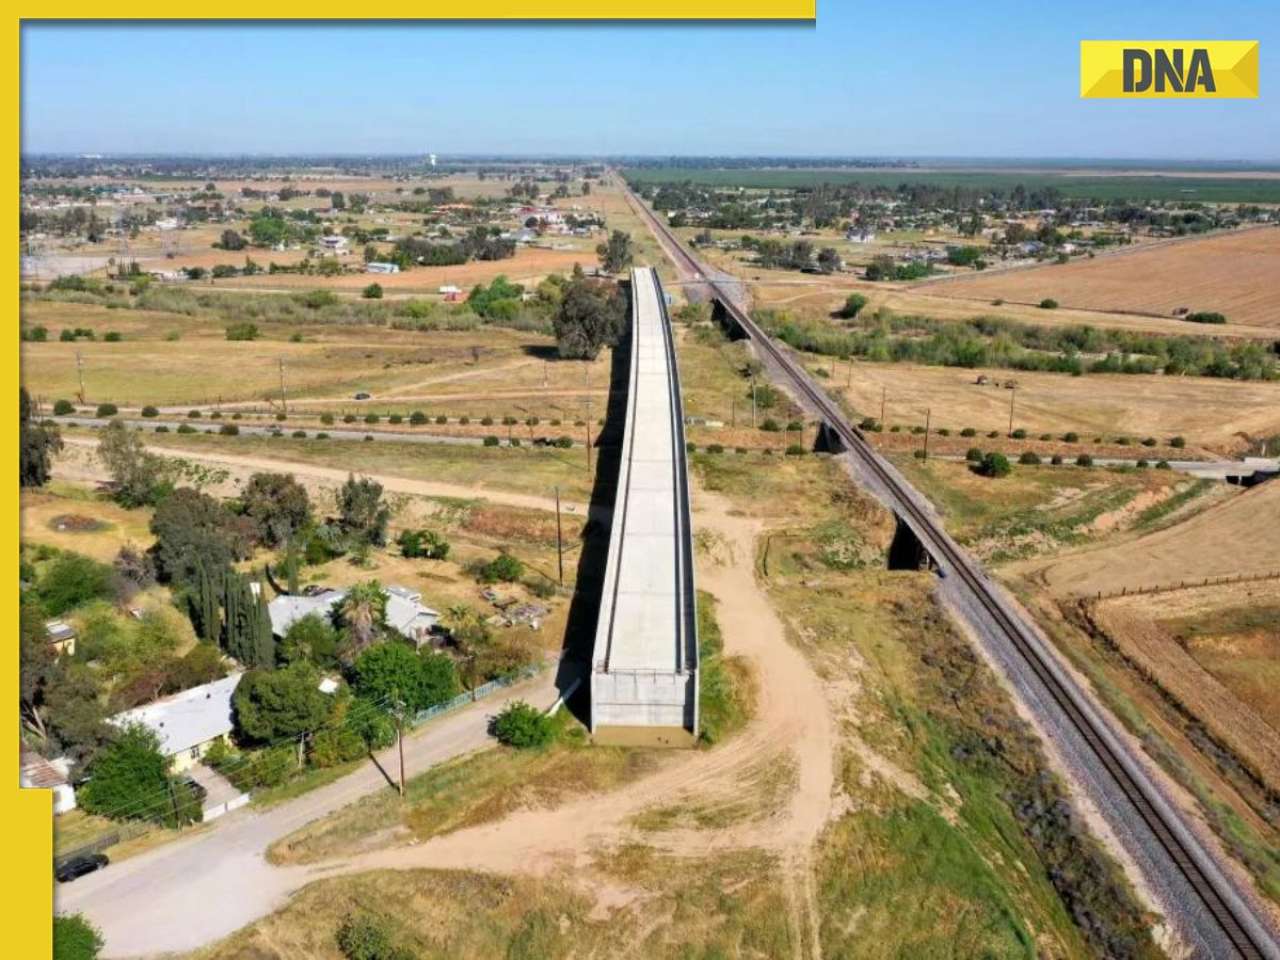 This Rs 917 crore high-speed rail bridge took 9 years to build, but it leads nowhere, know why 